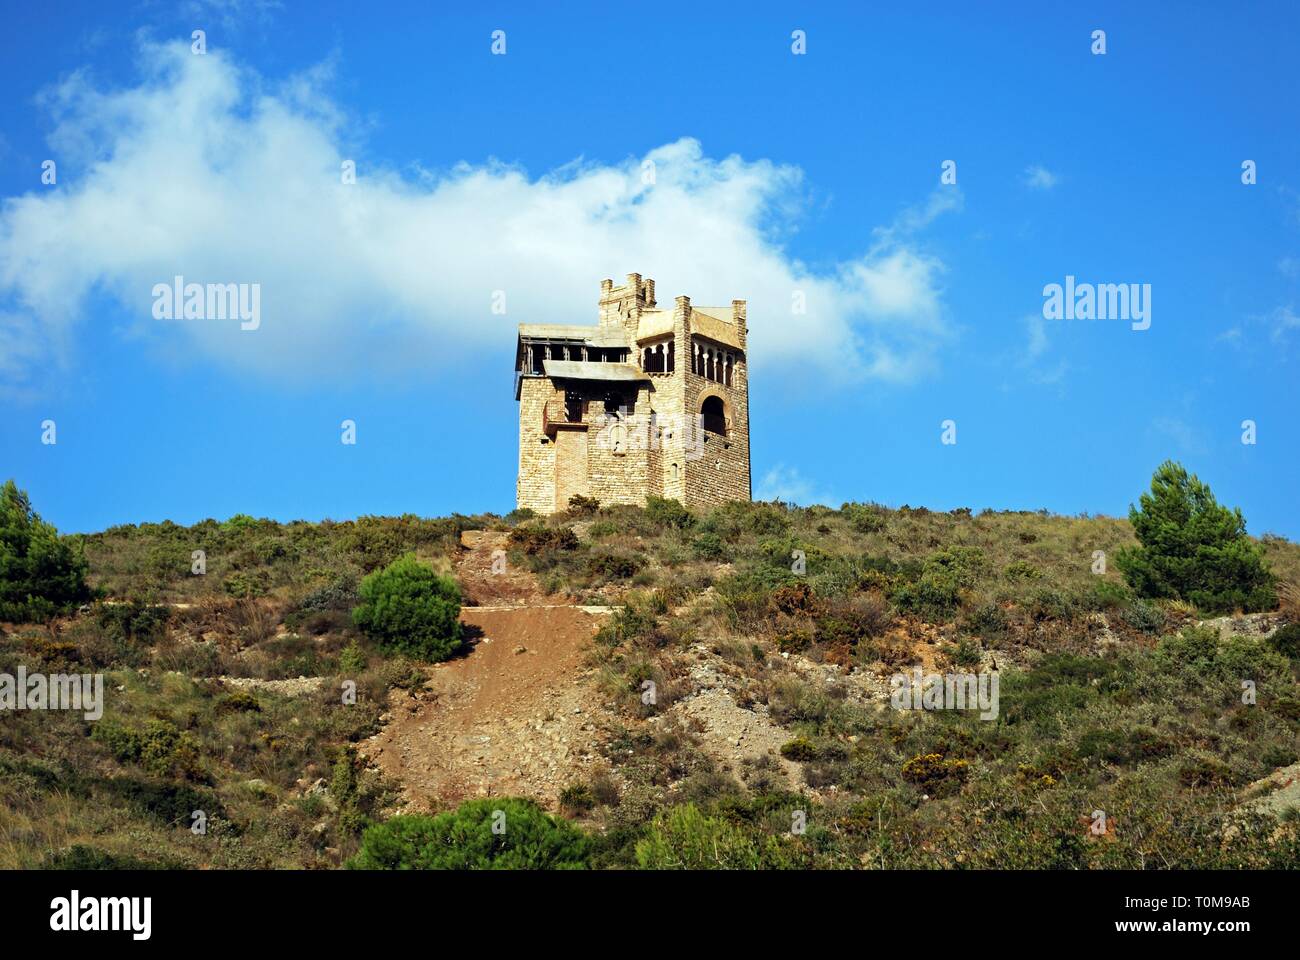 Folly in the countryside originally built as a water tower, Alhaurin El Grande, Costa del Sol, Andalusia, Spain, Europe. Stock Photo